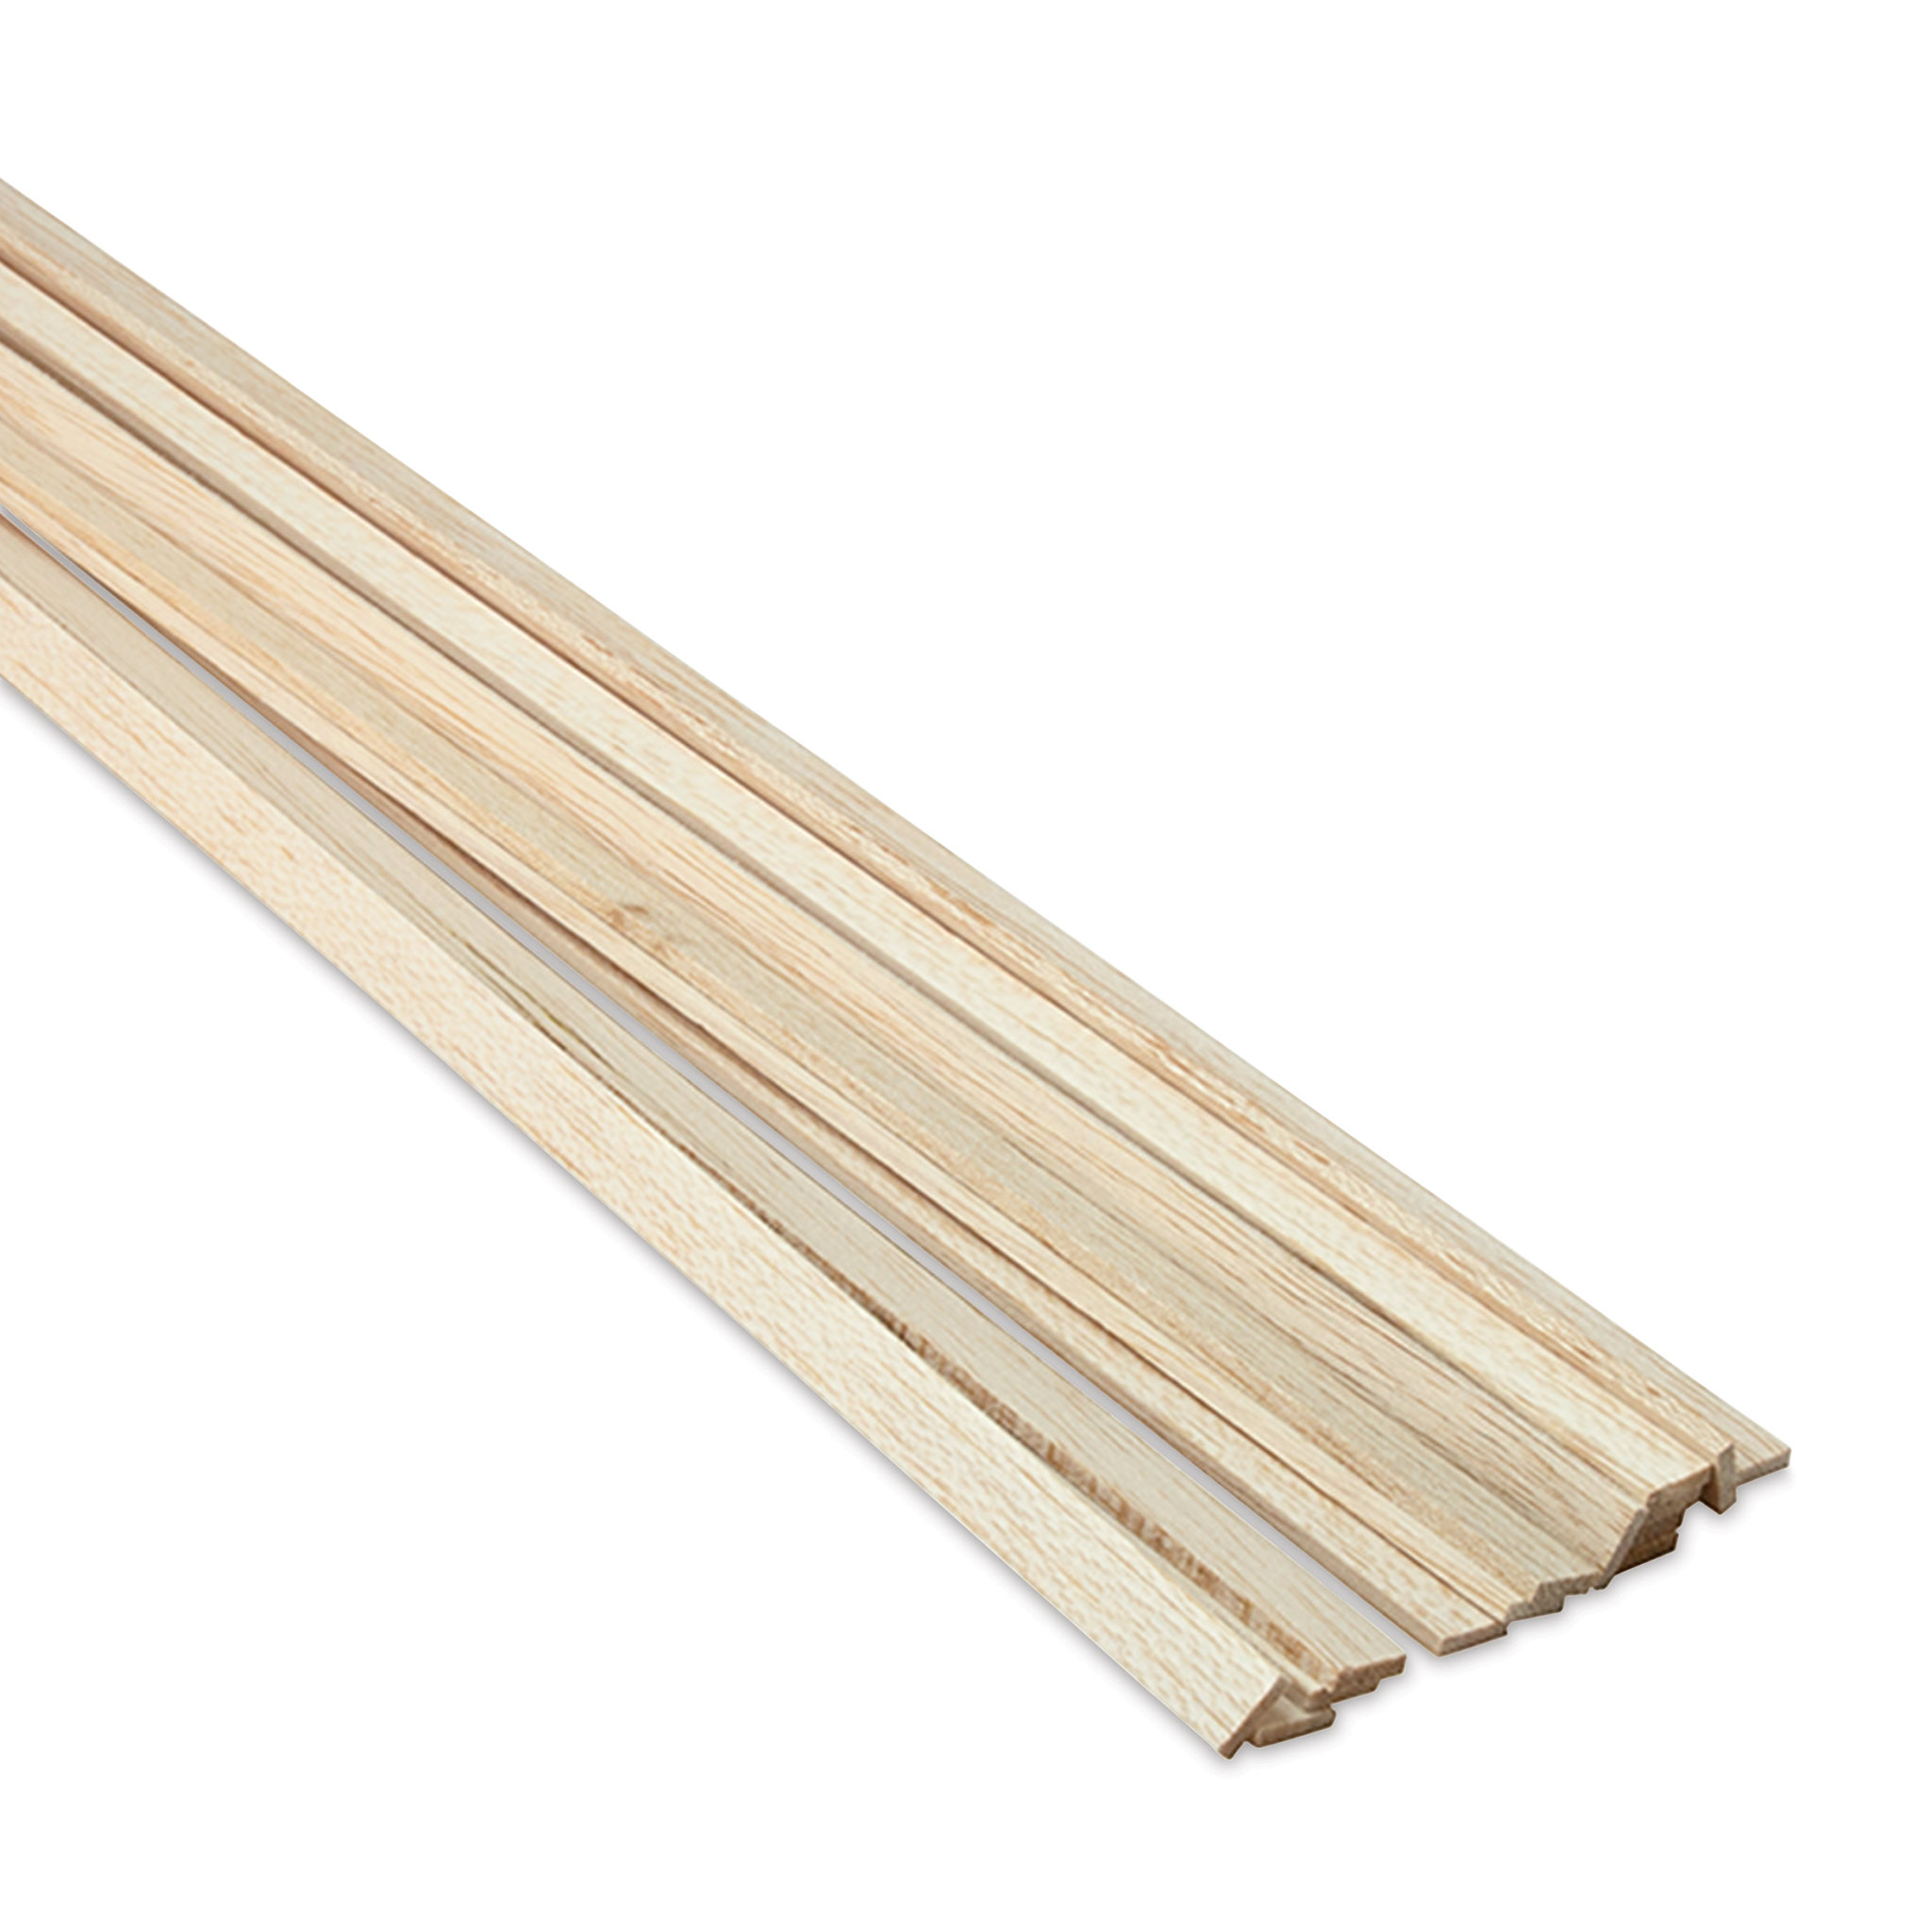 Midwest Products Balsa Wood Strips - 15 Pieces, 1/8 x 1/2 x 36